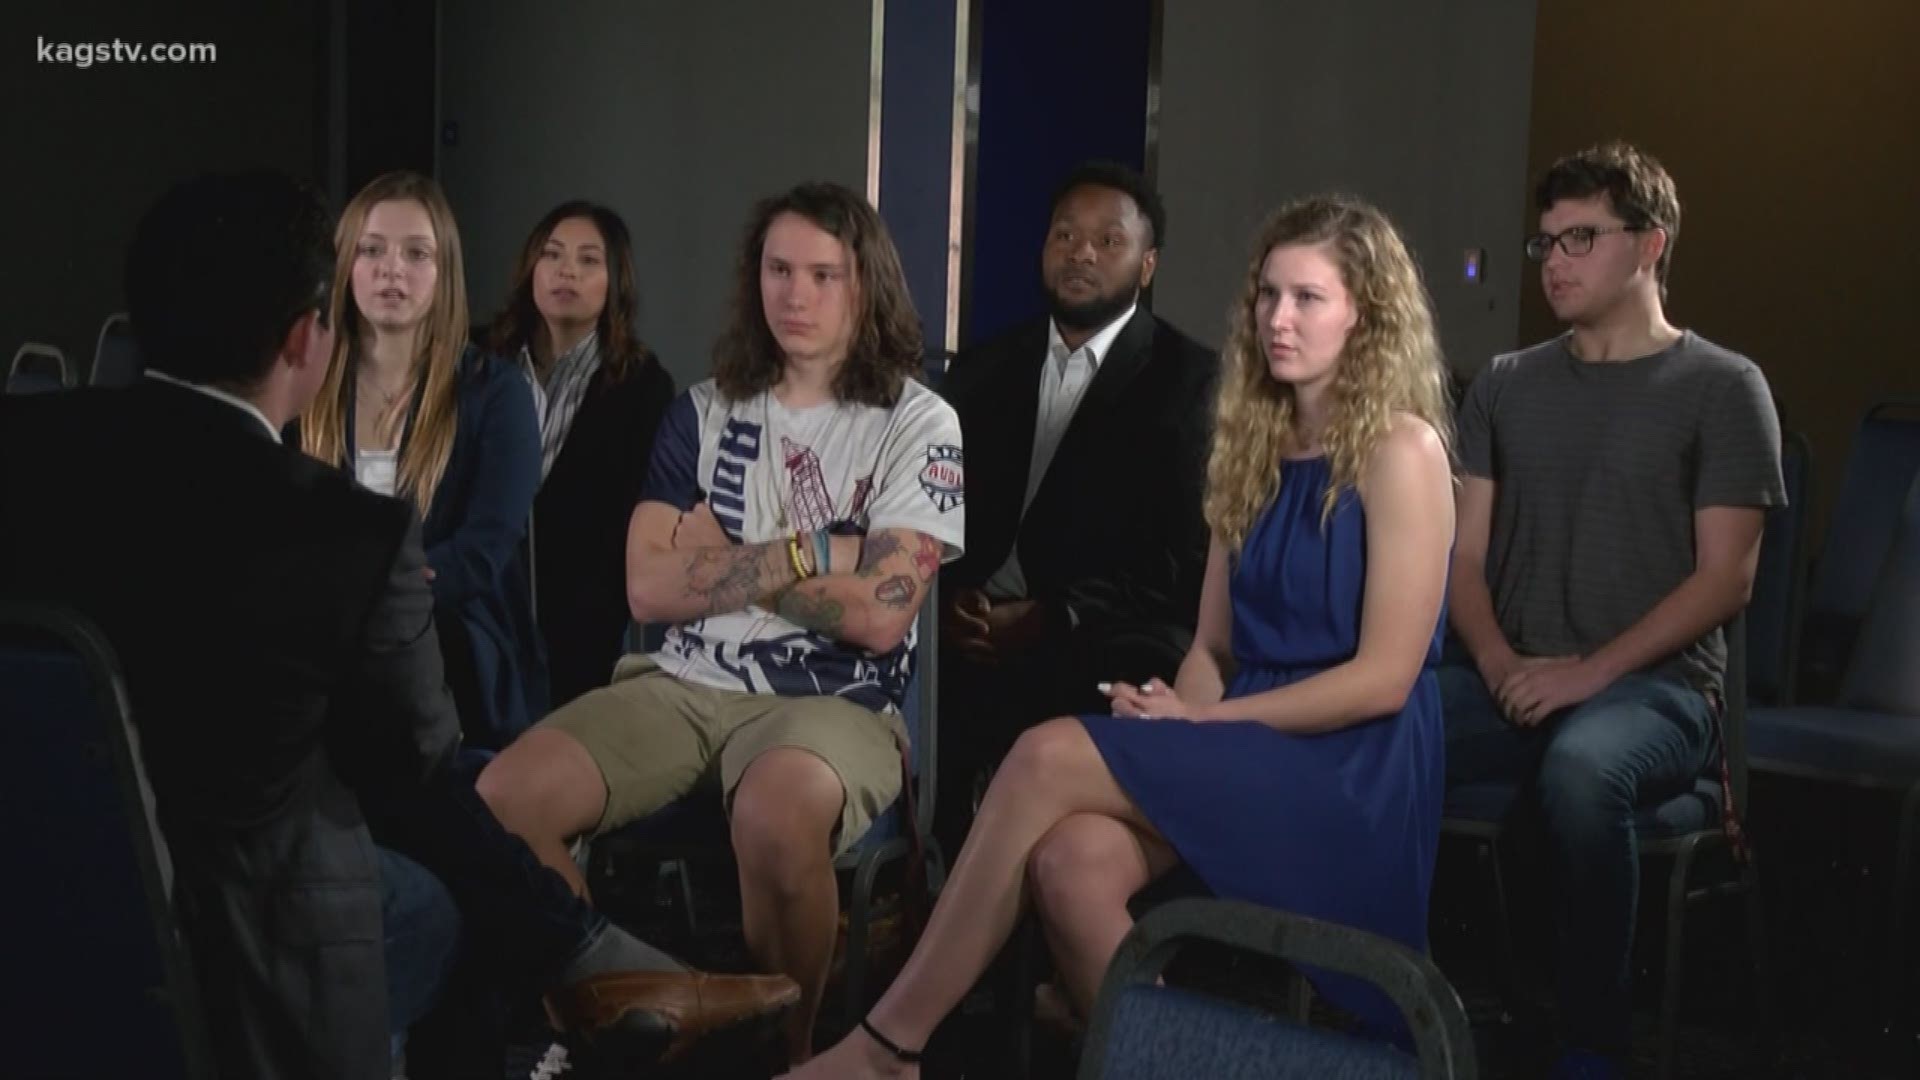 Six Blinn College politics students talk about the current state of US politics and what it's like to be a young voter.